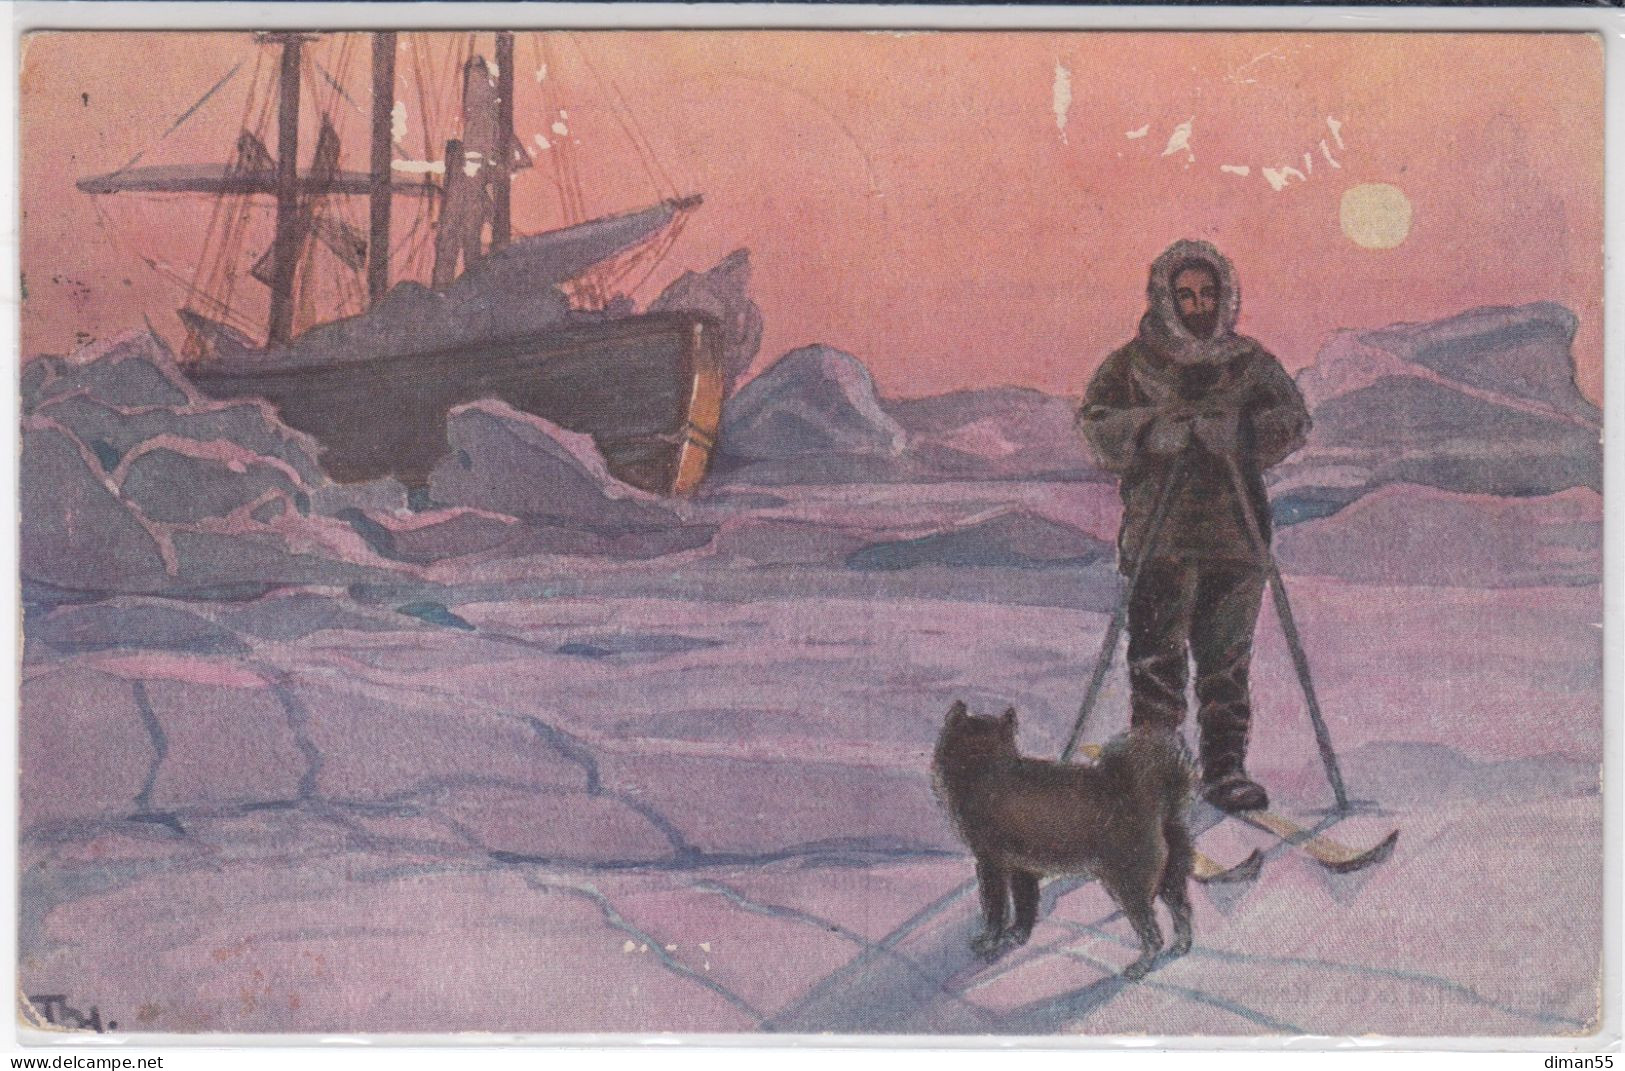 NORWAY - POLAR CRUISE - POLHAVET 4-8-1924 POSTAL CARD - Very Rare And HV - Covers & Documents